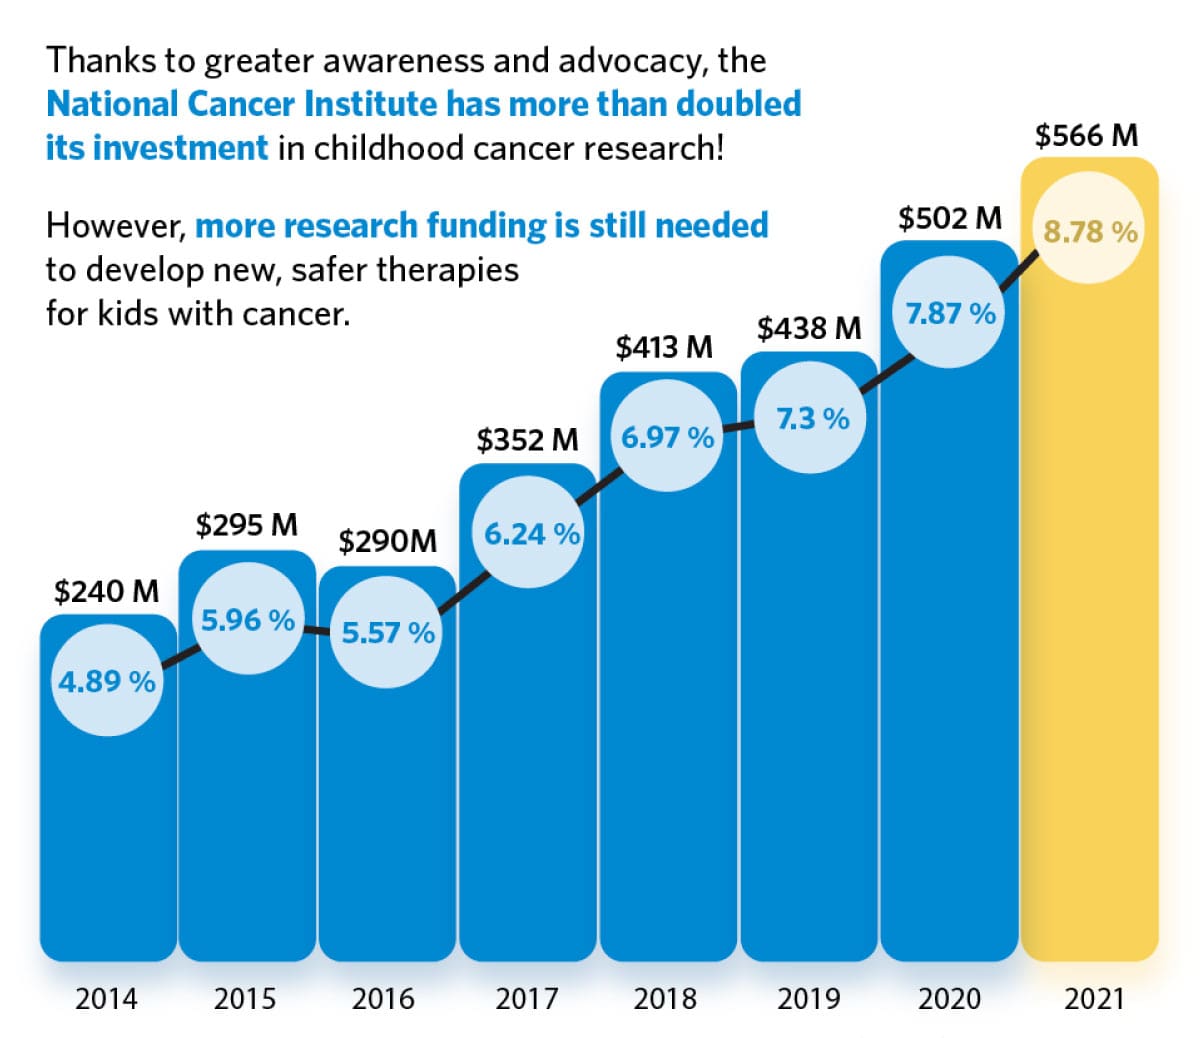 Bar graph showing the National Cancer Institute's investment in childhood cancer research from 2014 to 2021. 2014: $240M (4.89%), 2015: $295M (5.96%), 2016: $290M (5.57%), 2017: $352M (6.24%), 2018: $413M (6.97%), 2019: $438M (7.3%), 2020: $502M (7.87%), 2021: $566M (8.78%). The graph shows an increase in investment over time, with a significant rise in 2021. The text notes that despite the increase, more research funding is needed to develop safer therapies for kids with cancer.
